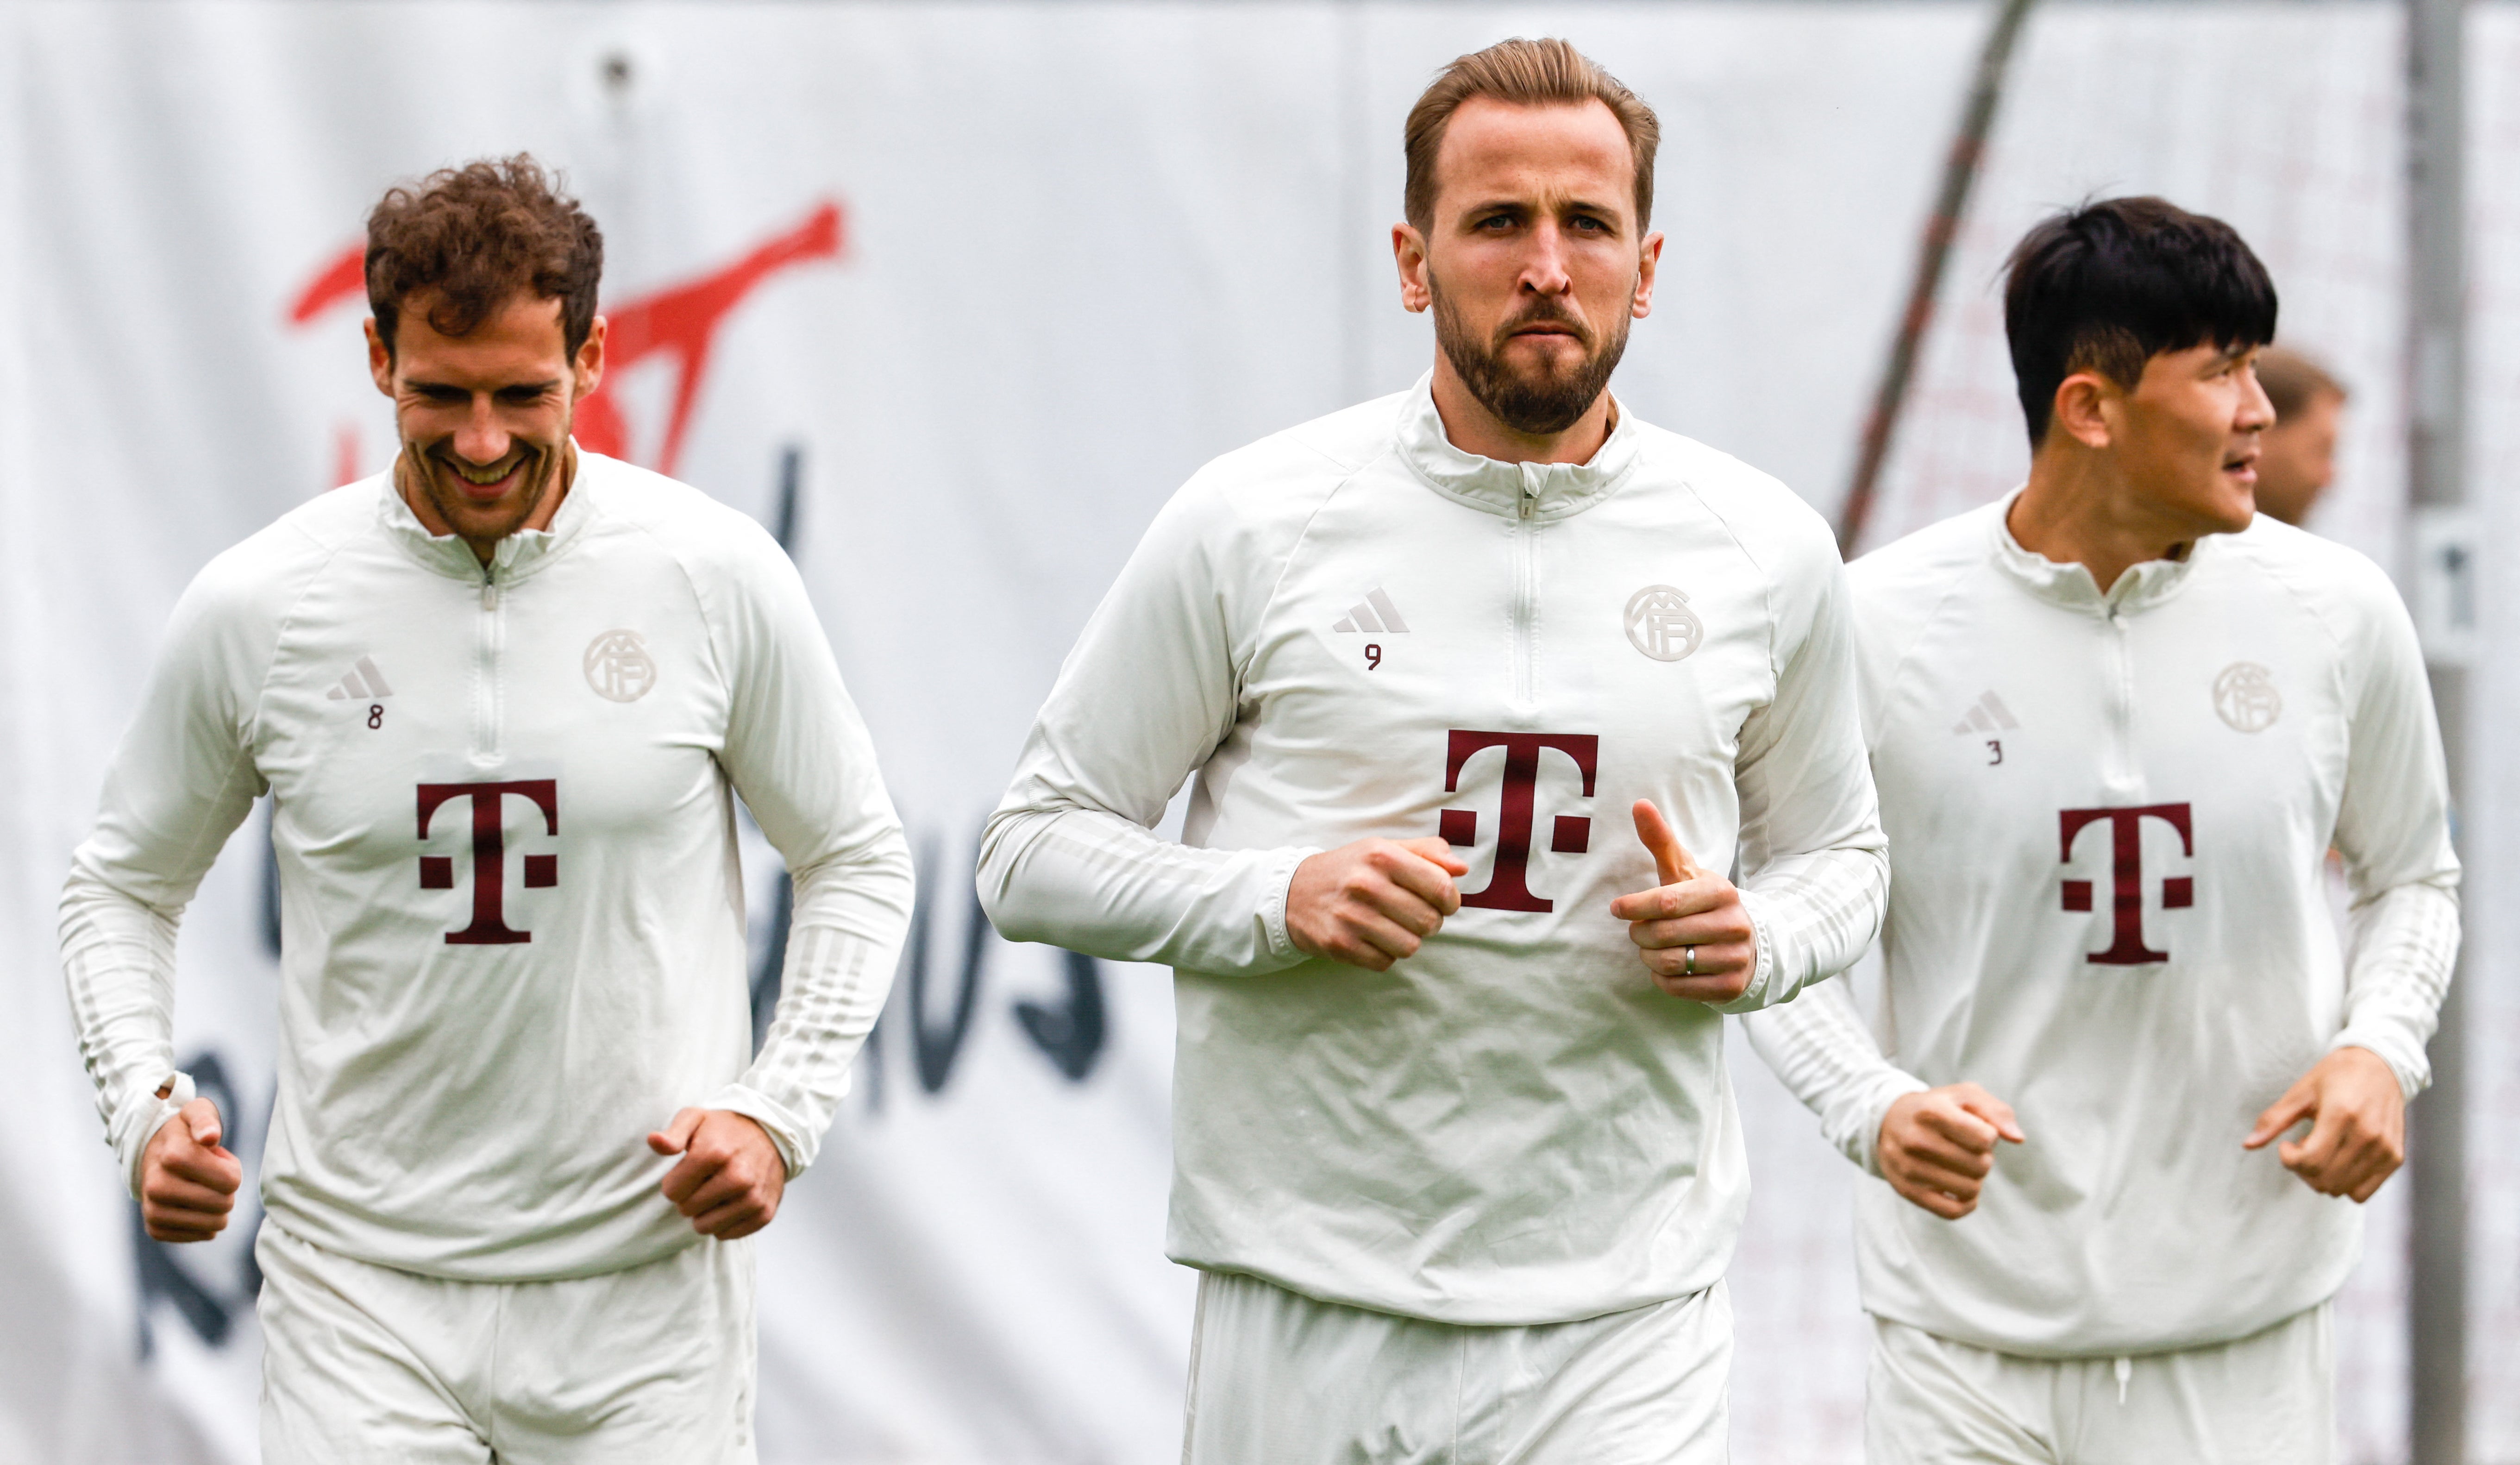 Harry Kane and Bayern Munich are preparing for the biggest game of their season.